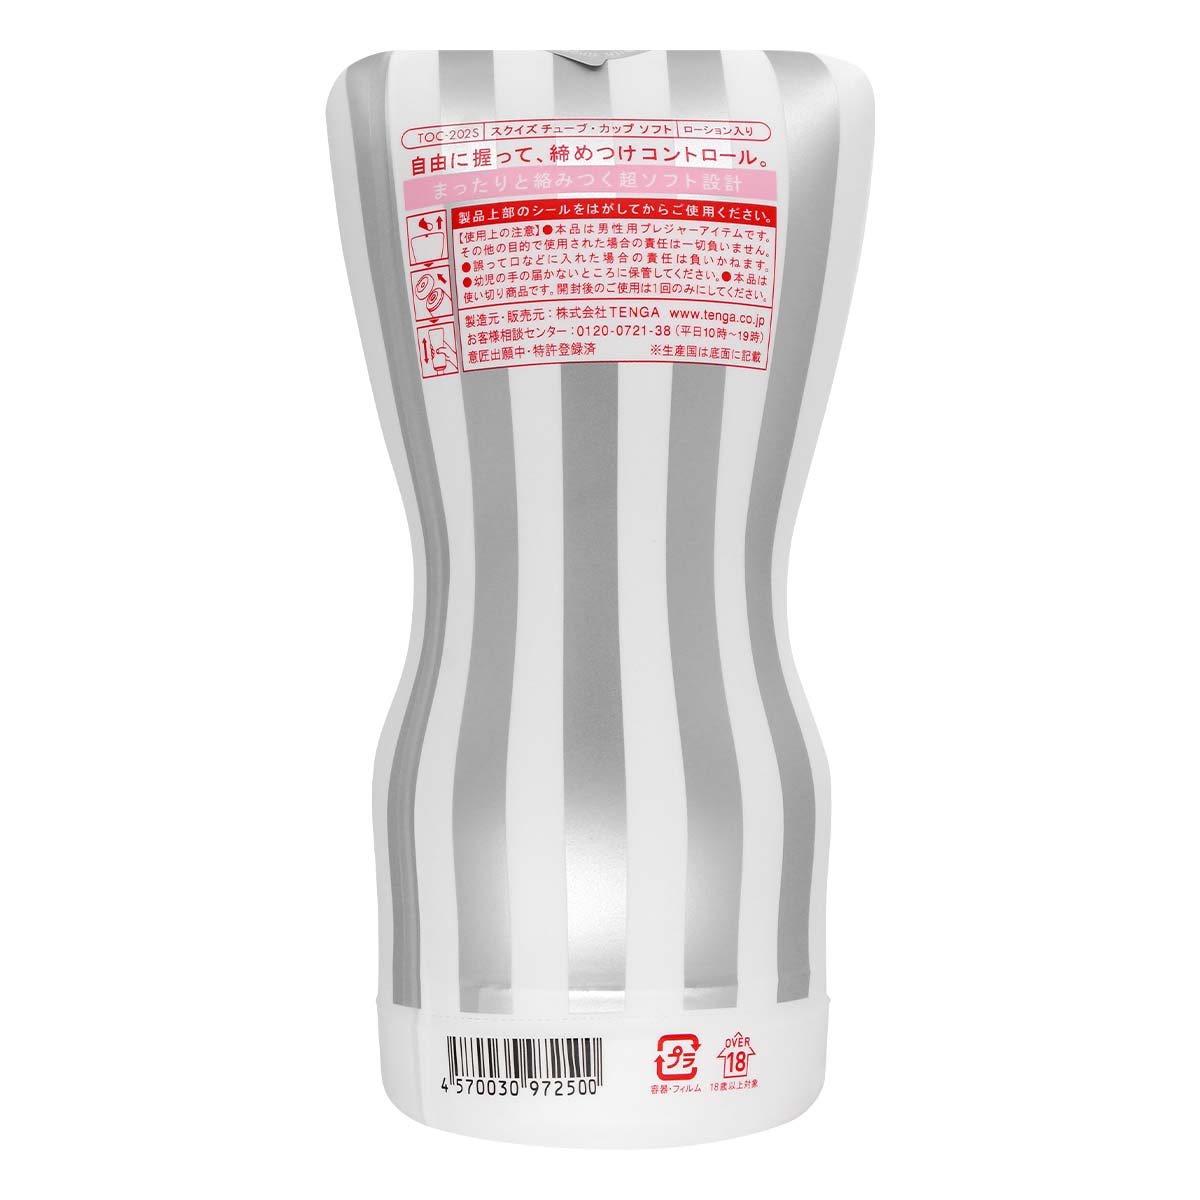 TENGA SQUEEZE TUBE CUP 2nd Generation SOFT-p_3